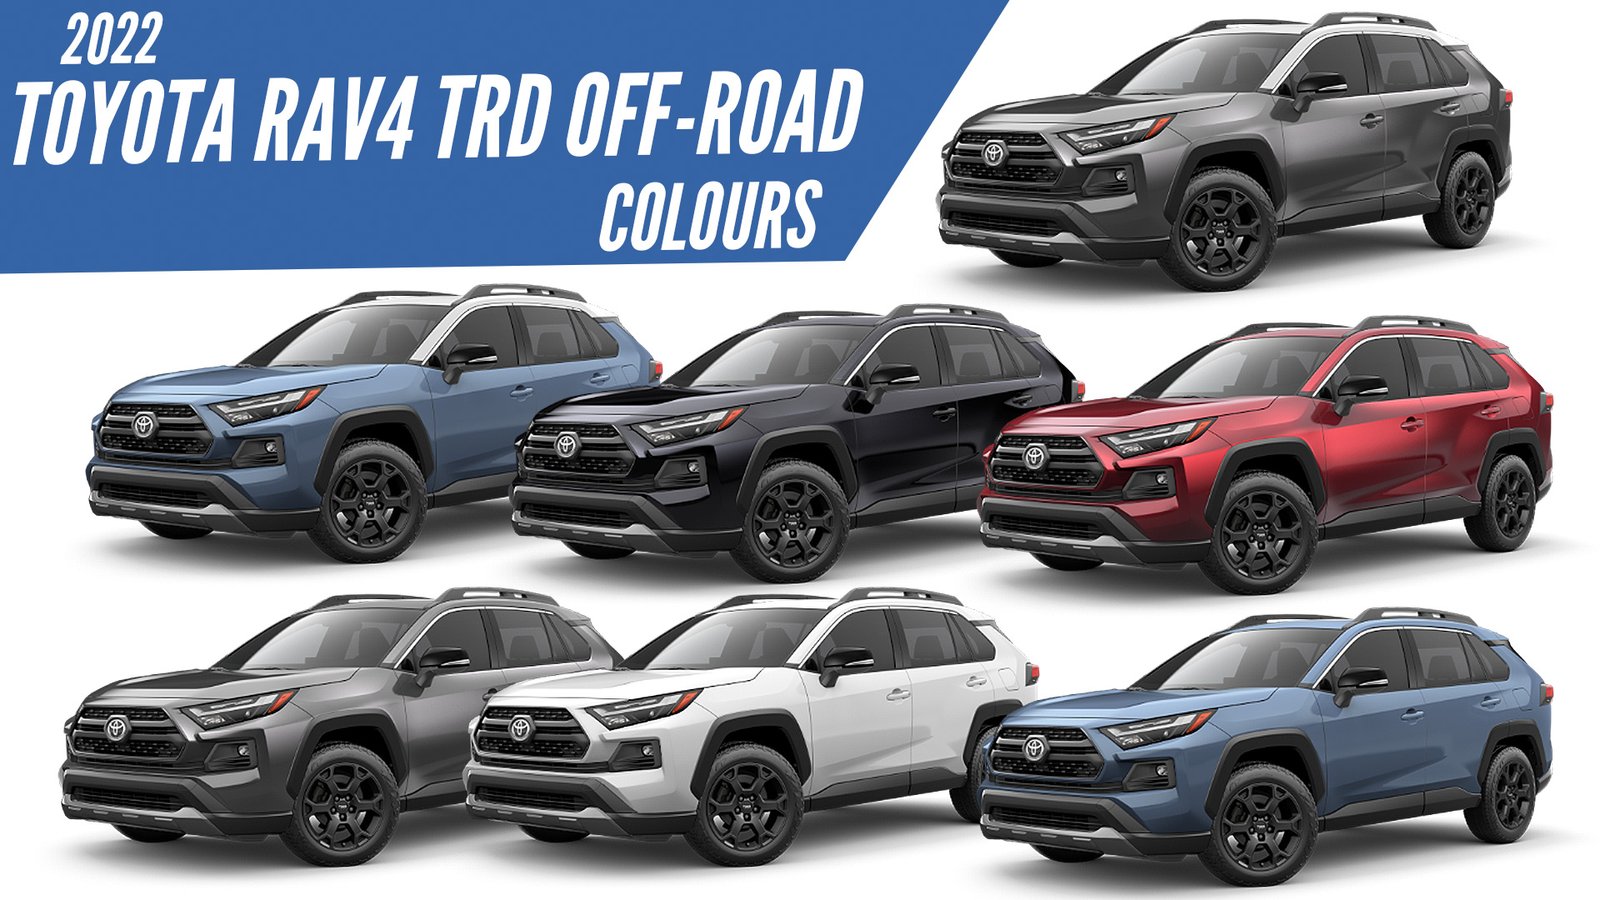 2022 Toyota RAV4 TRD Offroad All Color Options 